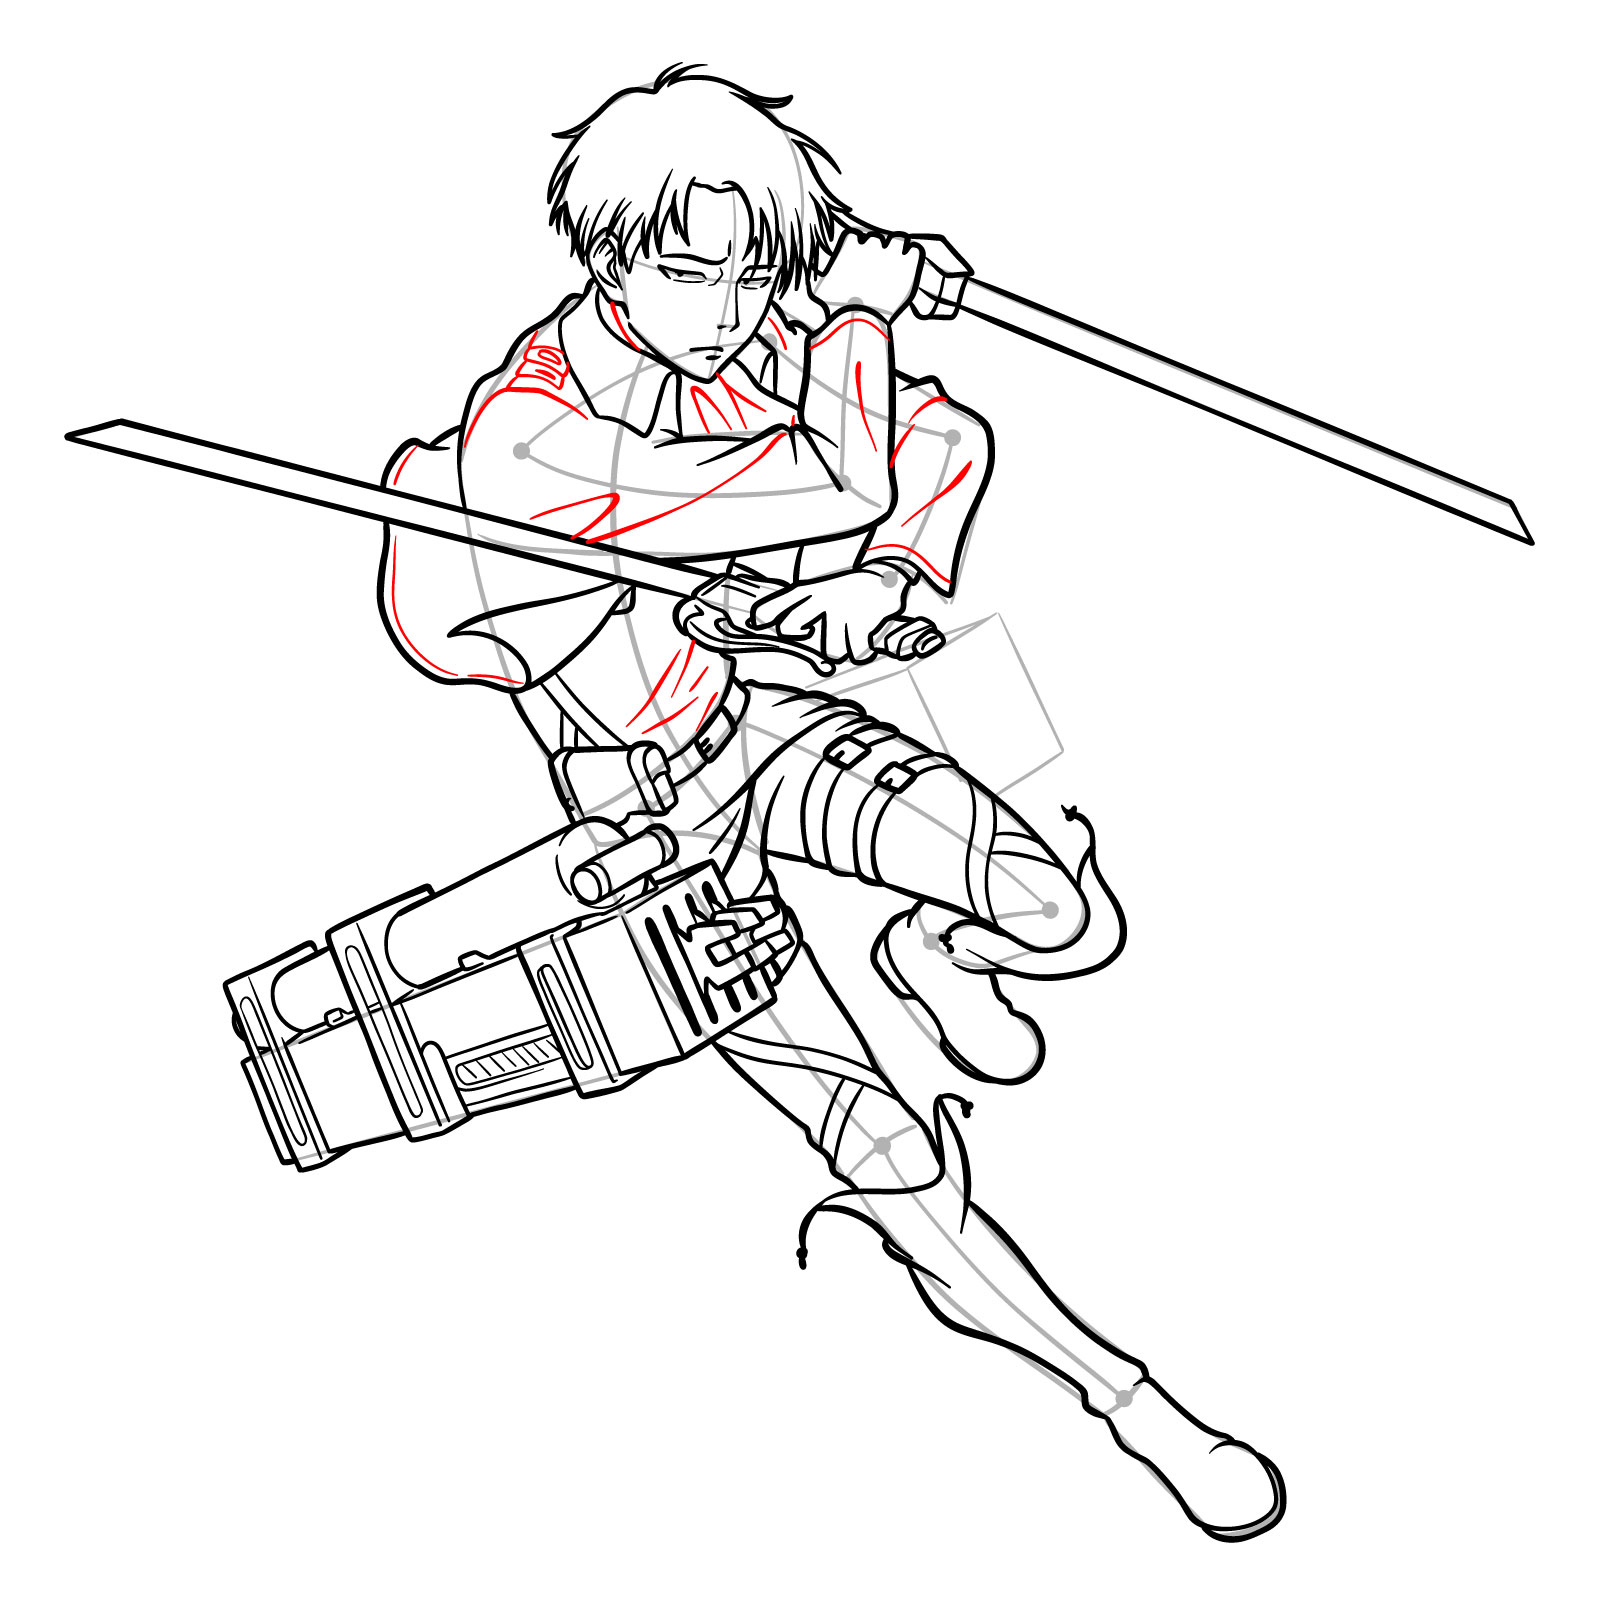 detailing of Captain Levi's pants, boots, and jacket in an action drawing - step 31